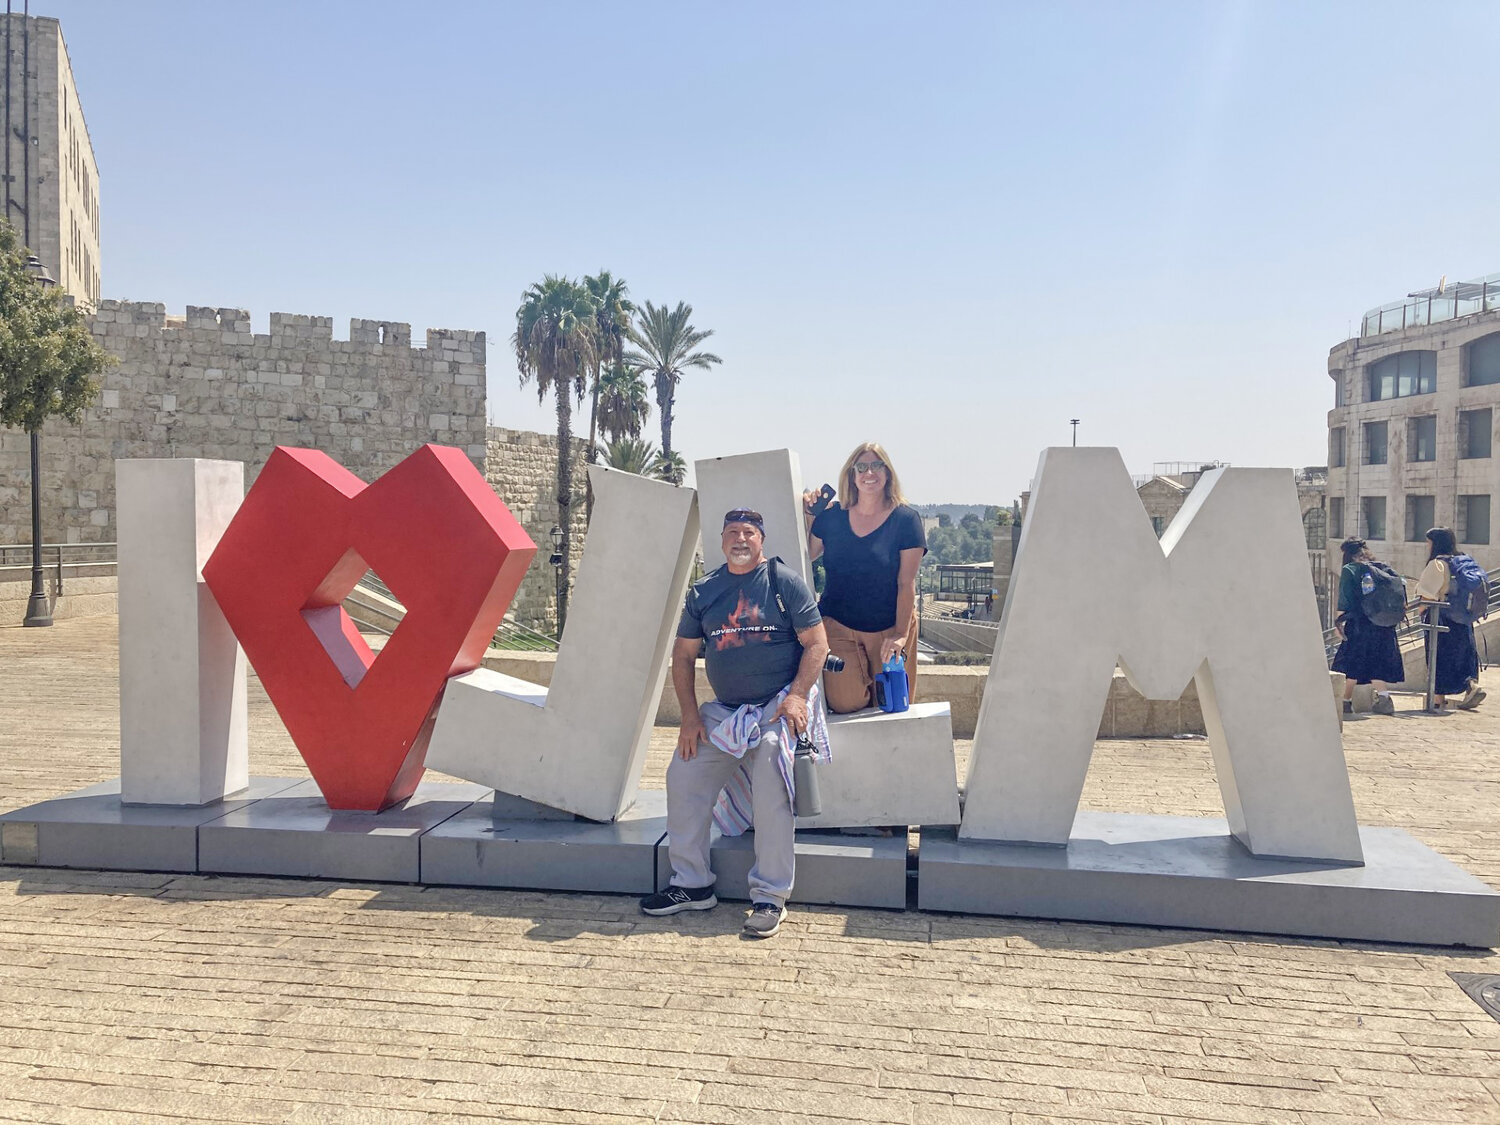 Jon and Susy Curtner pose in front of the “I love JLM” sculpture located just outside the Jaffa Gae leading into the old city of Jerusalem, Israel.